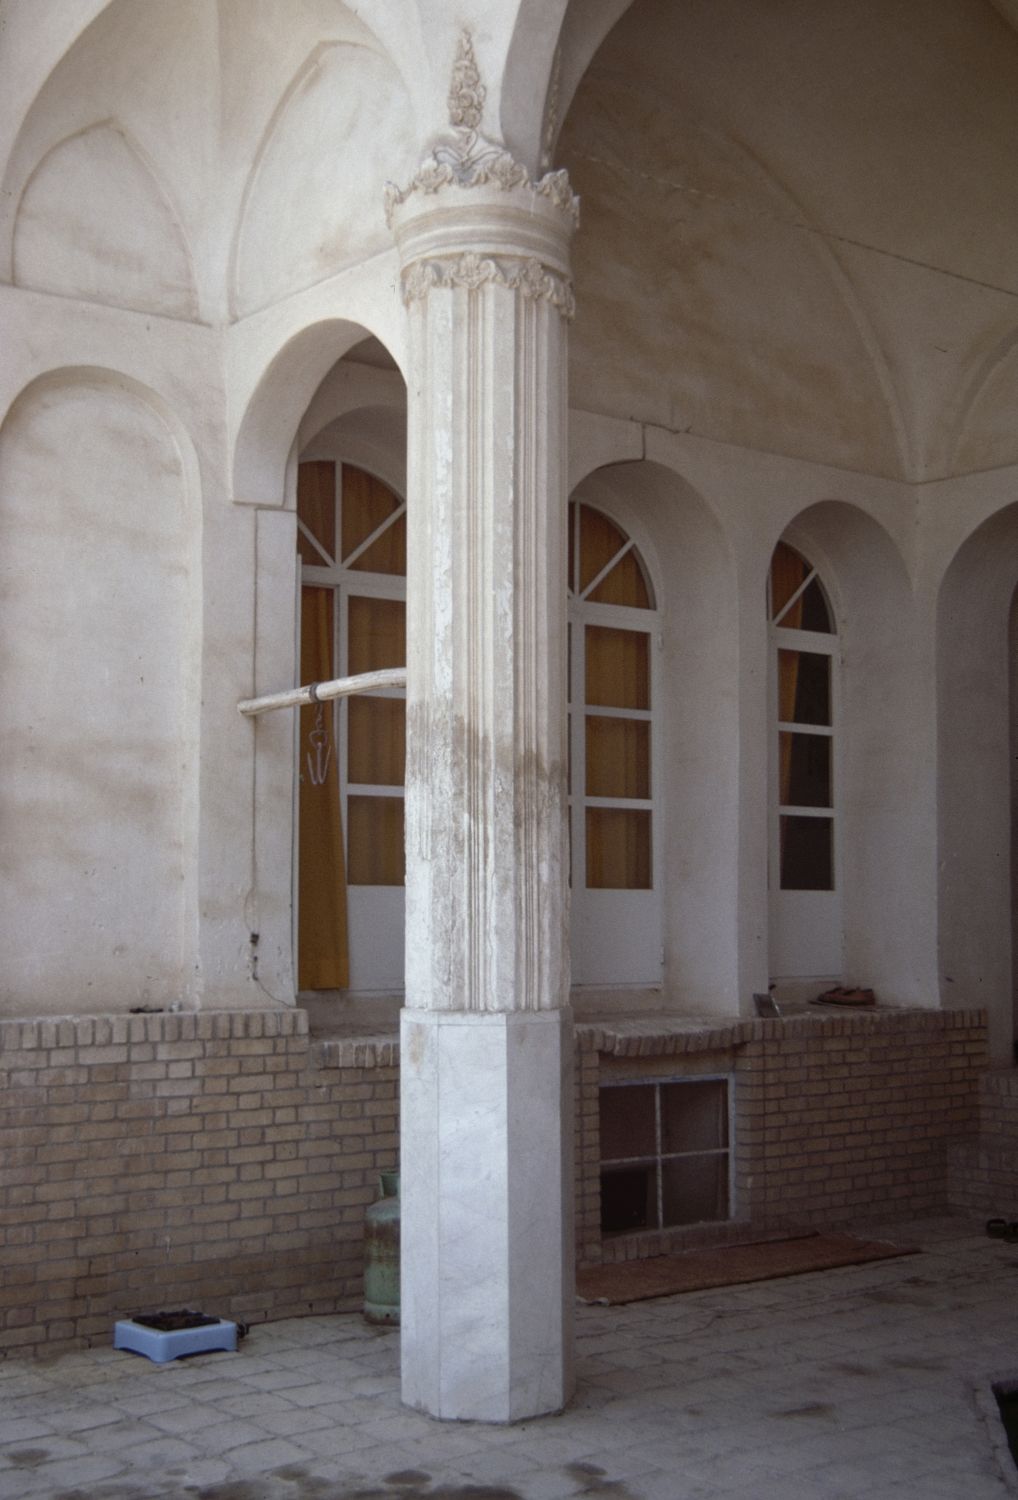 Khanah-i Yiganah - View of a column supporting vaulted space.